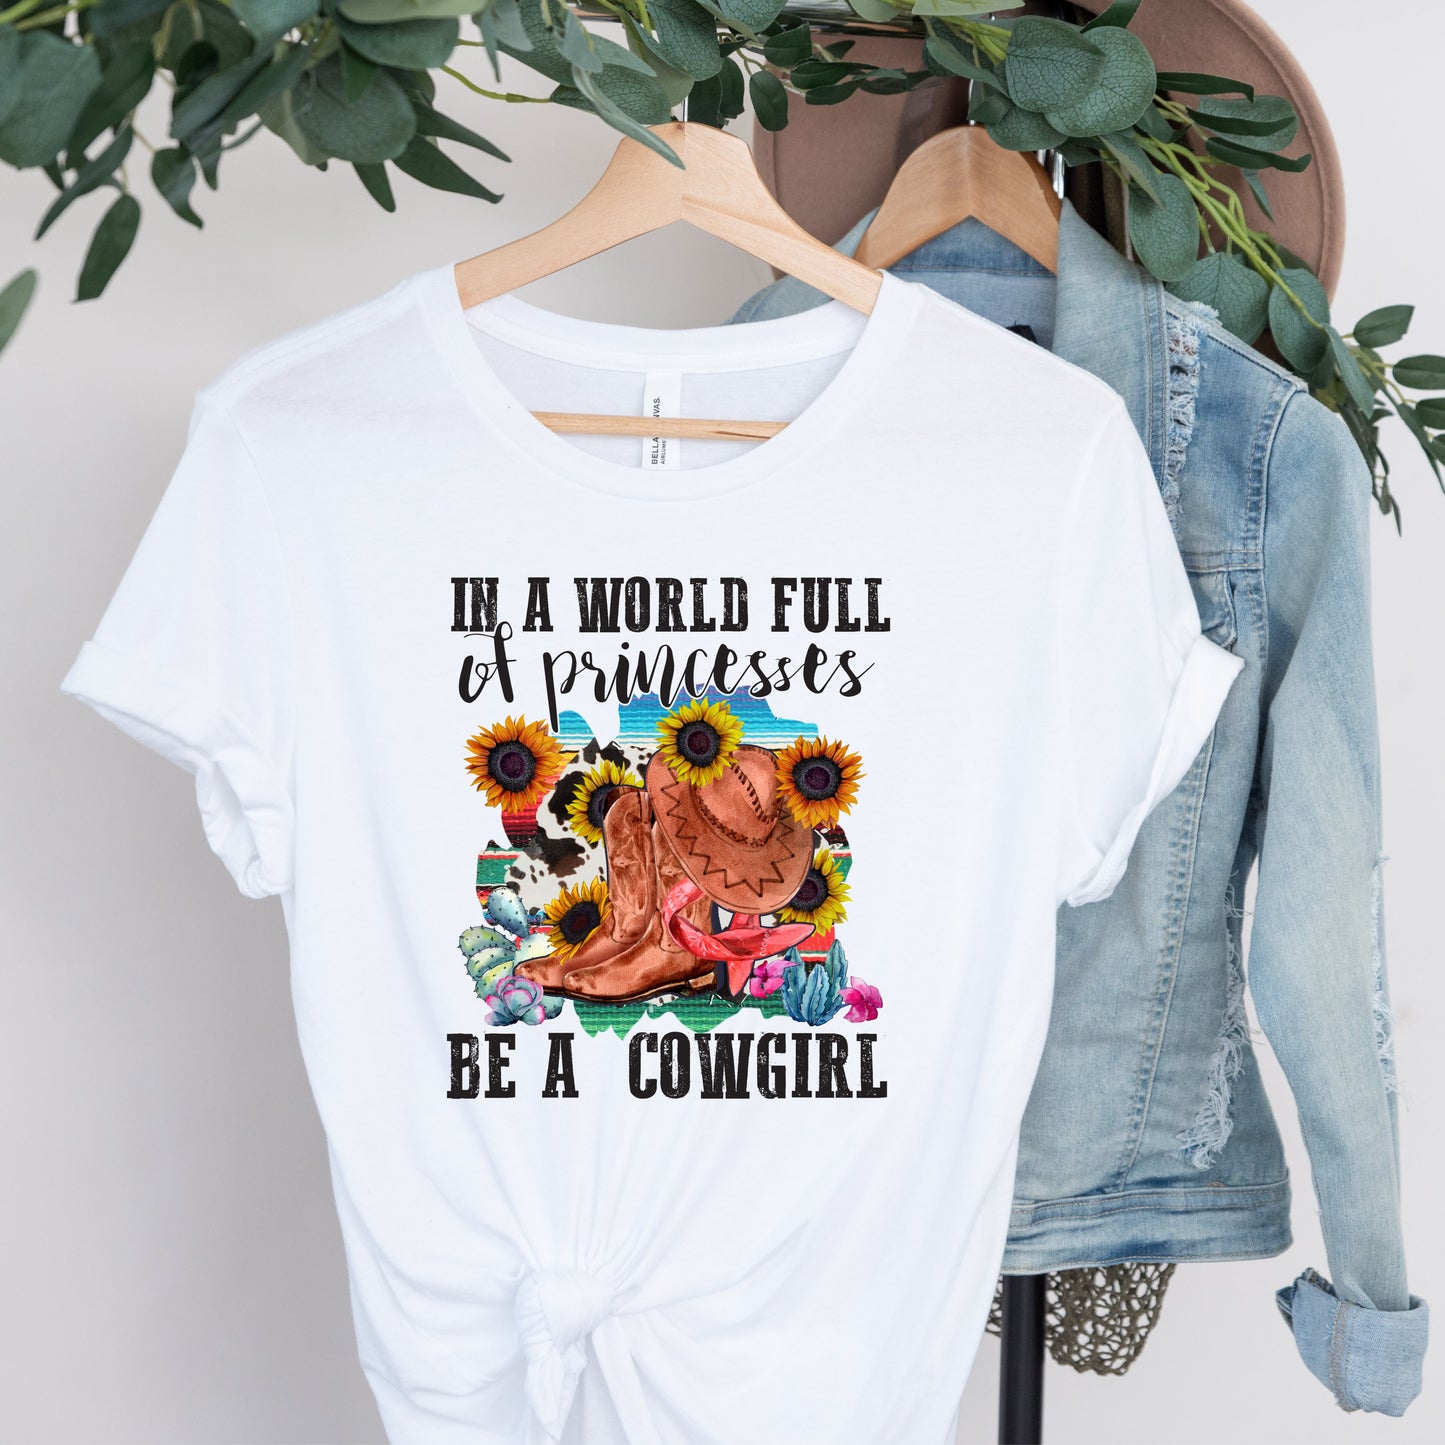 In A World Full of Princesses Be A Cowgirl Short Sleeve Tee, Western T-Shirt, Western Shirt, Cowgirl T-Shirt, Gift For Her, Gift For Friend